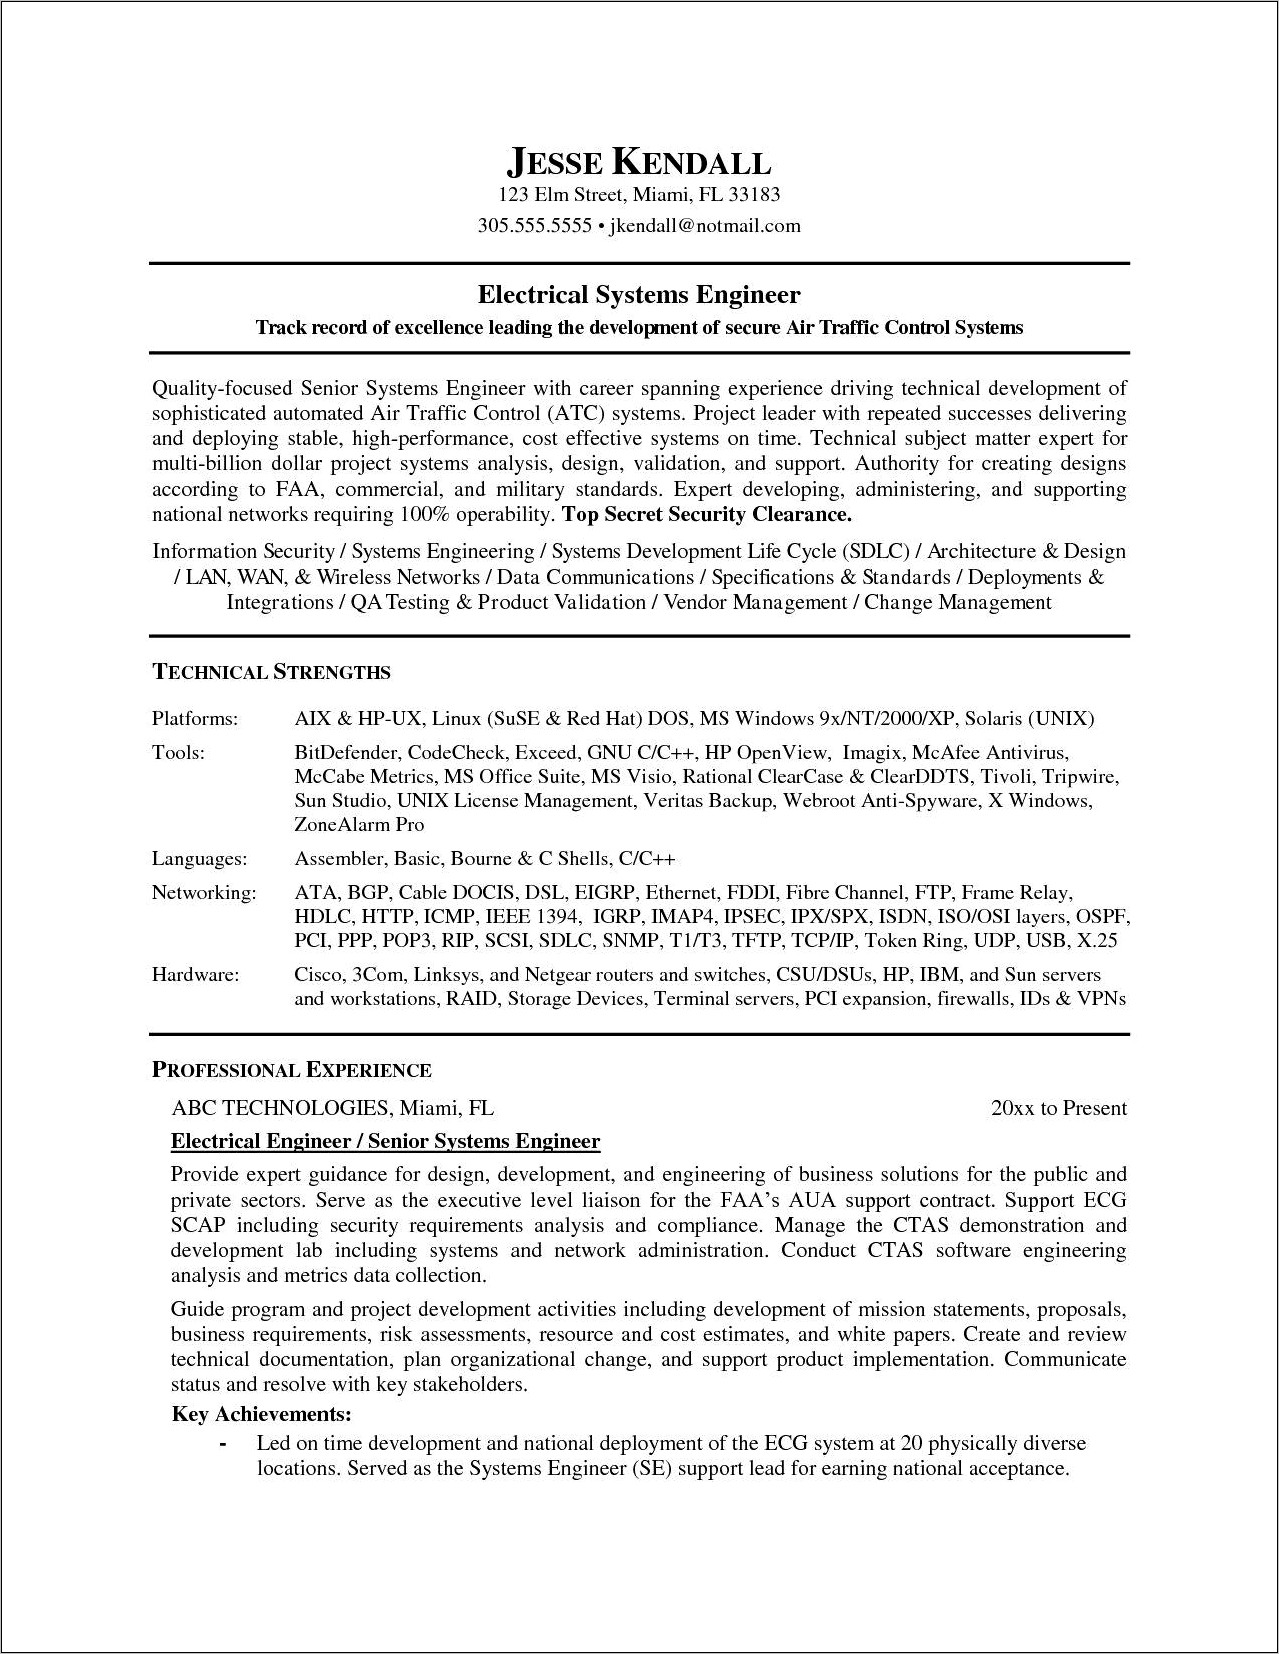 Real Resumes For Engineering Jobs